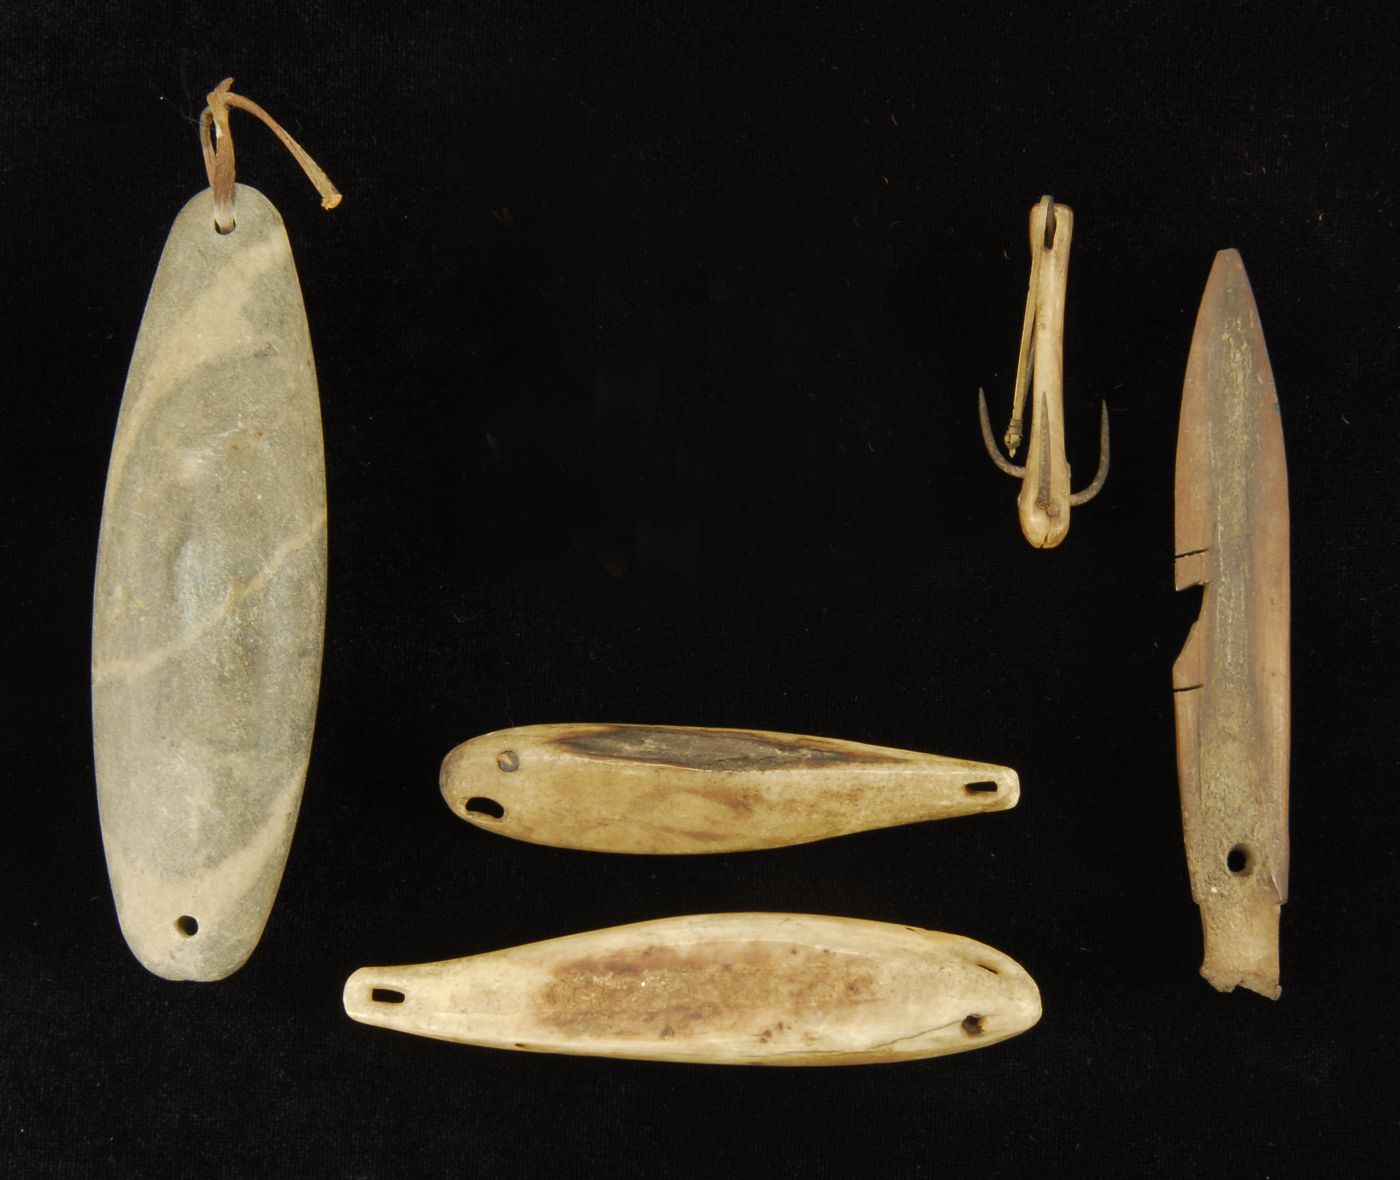 FIVE INUIT FISHING OR HUNTING IMPLEMENTS19th